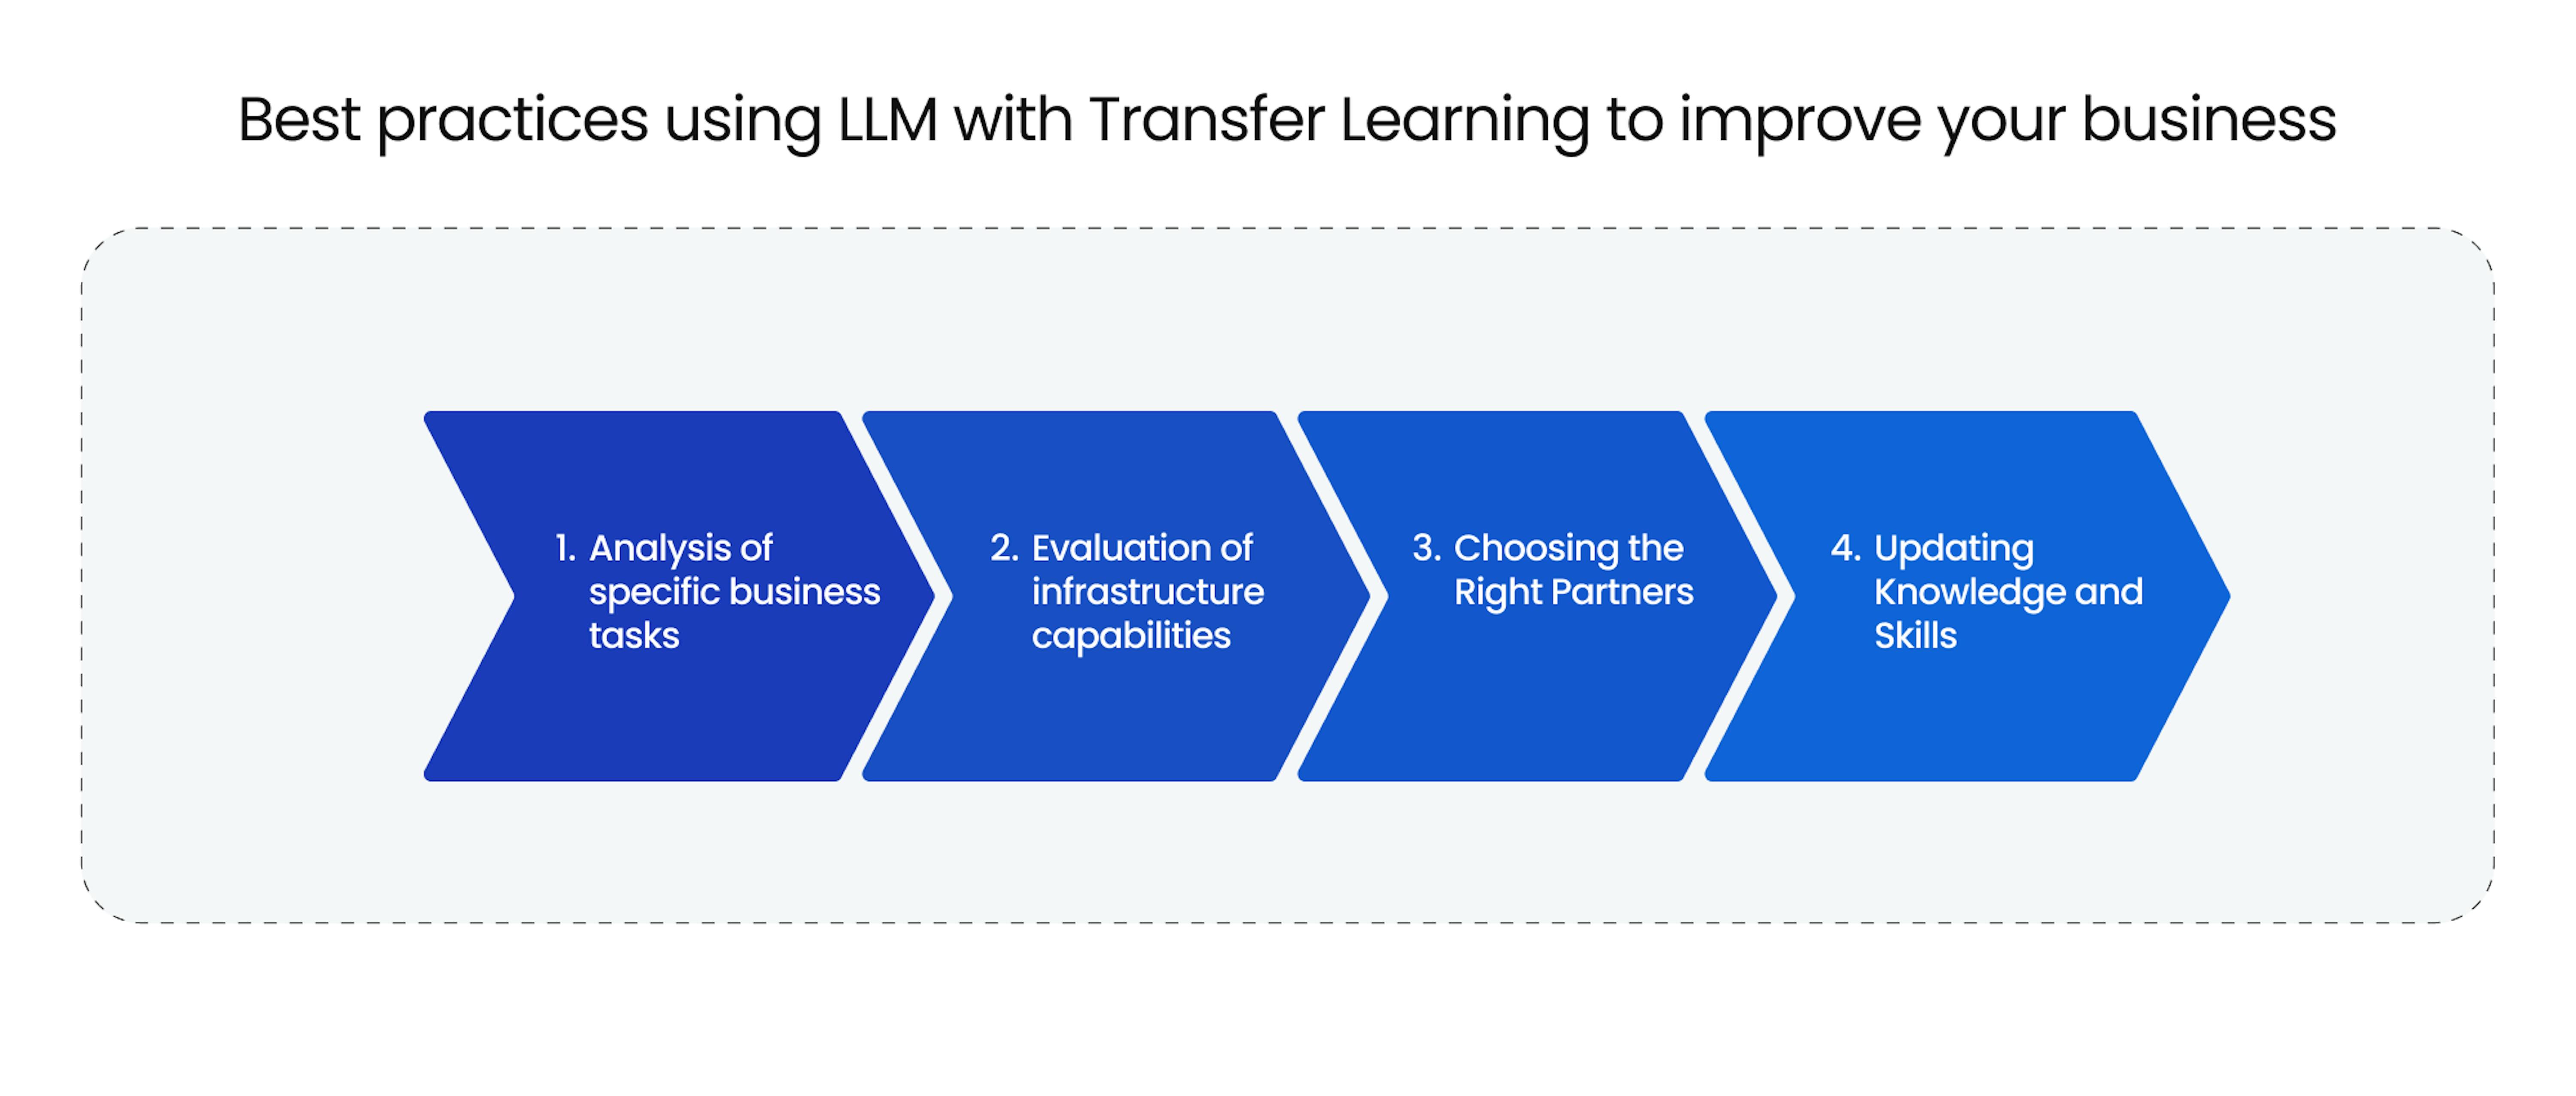 Best practices using LLM with Transfer Learning to improve your business